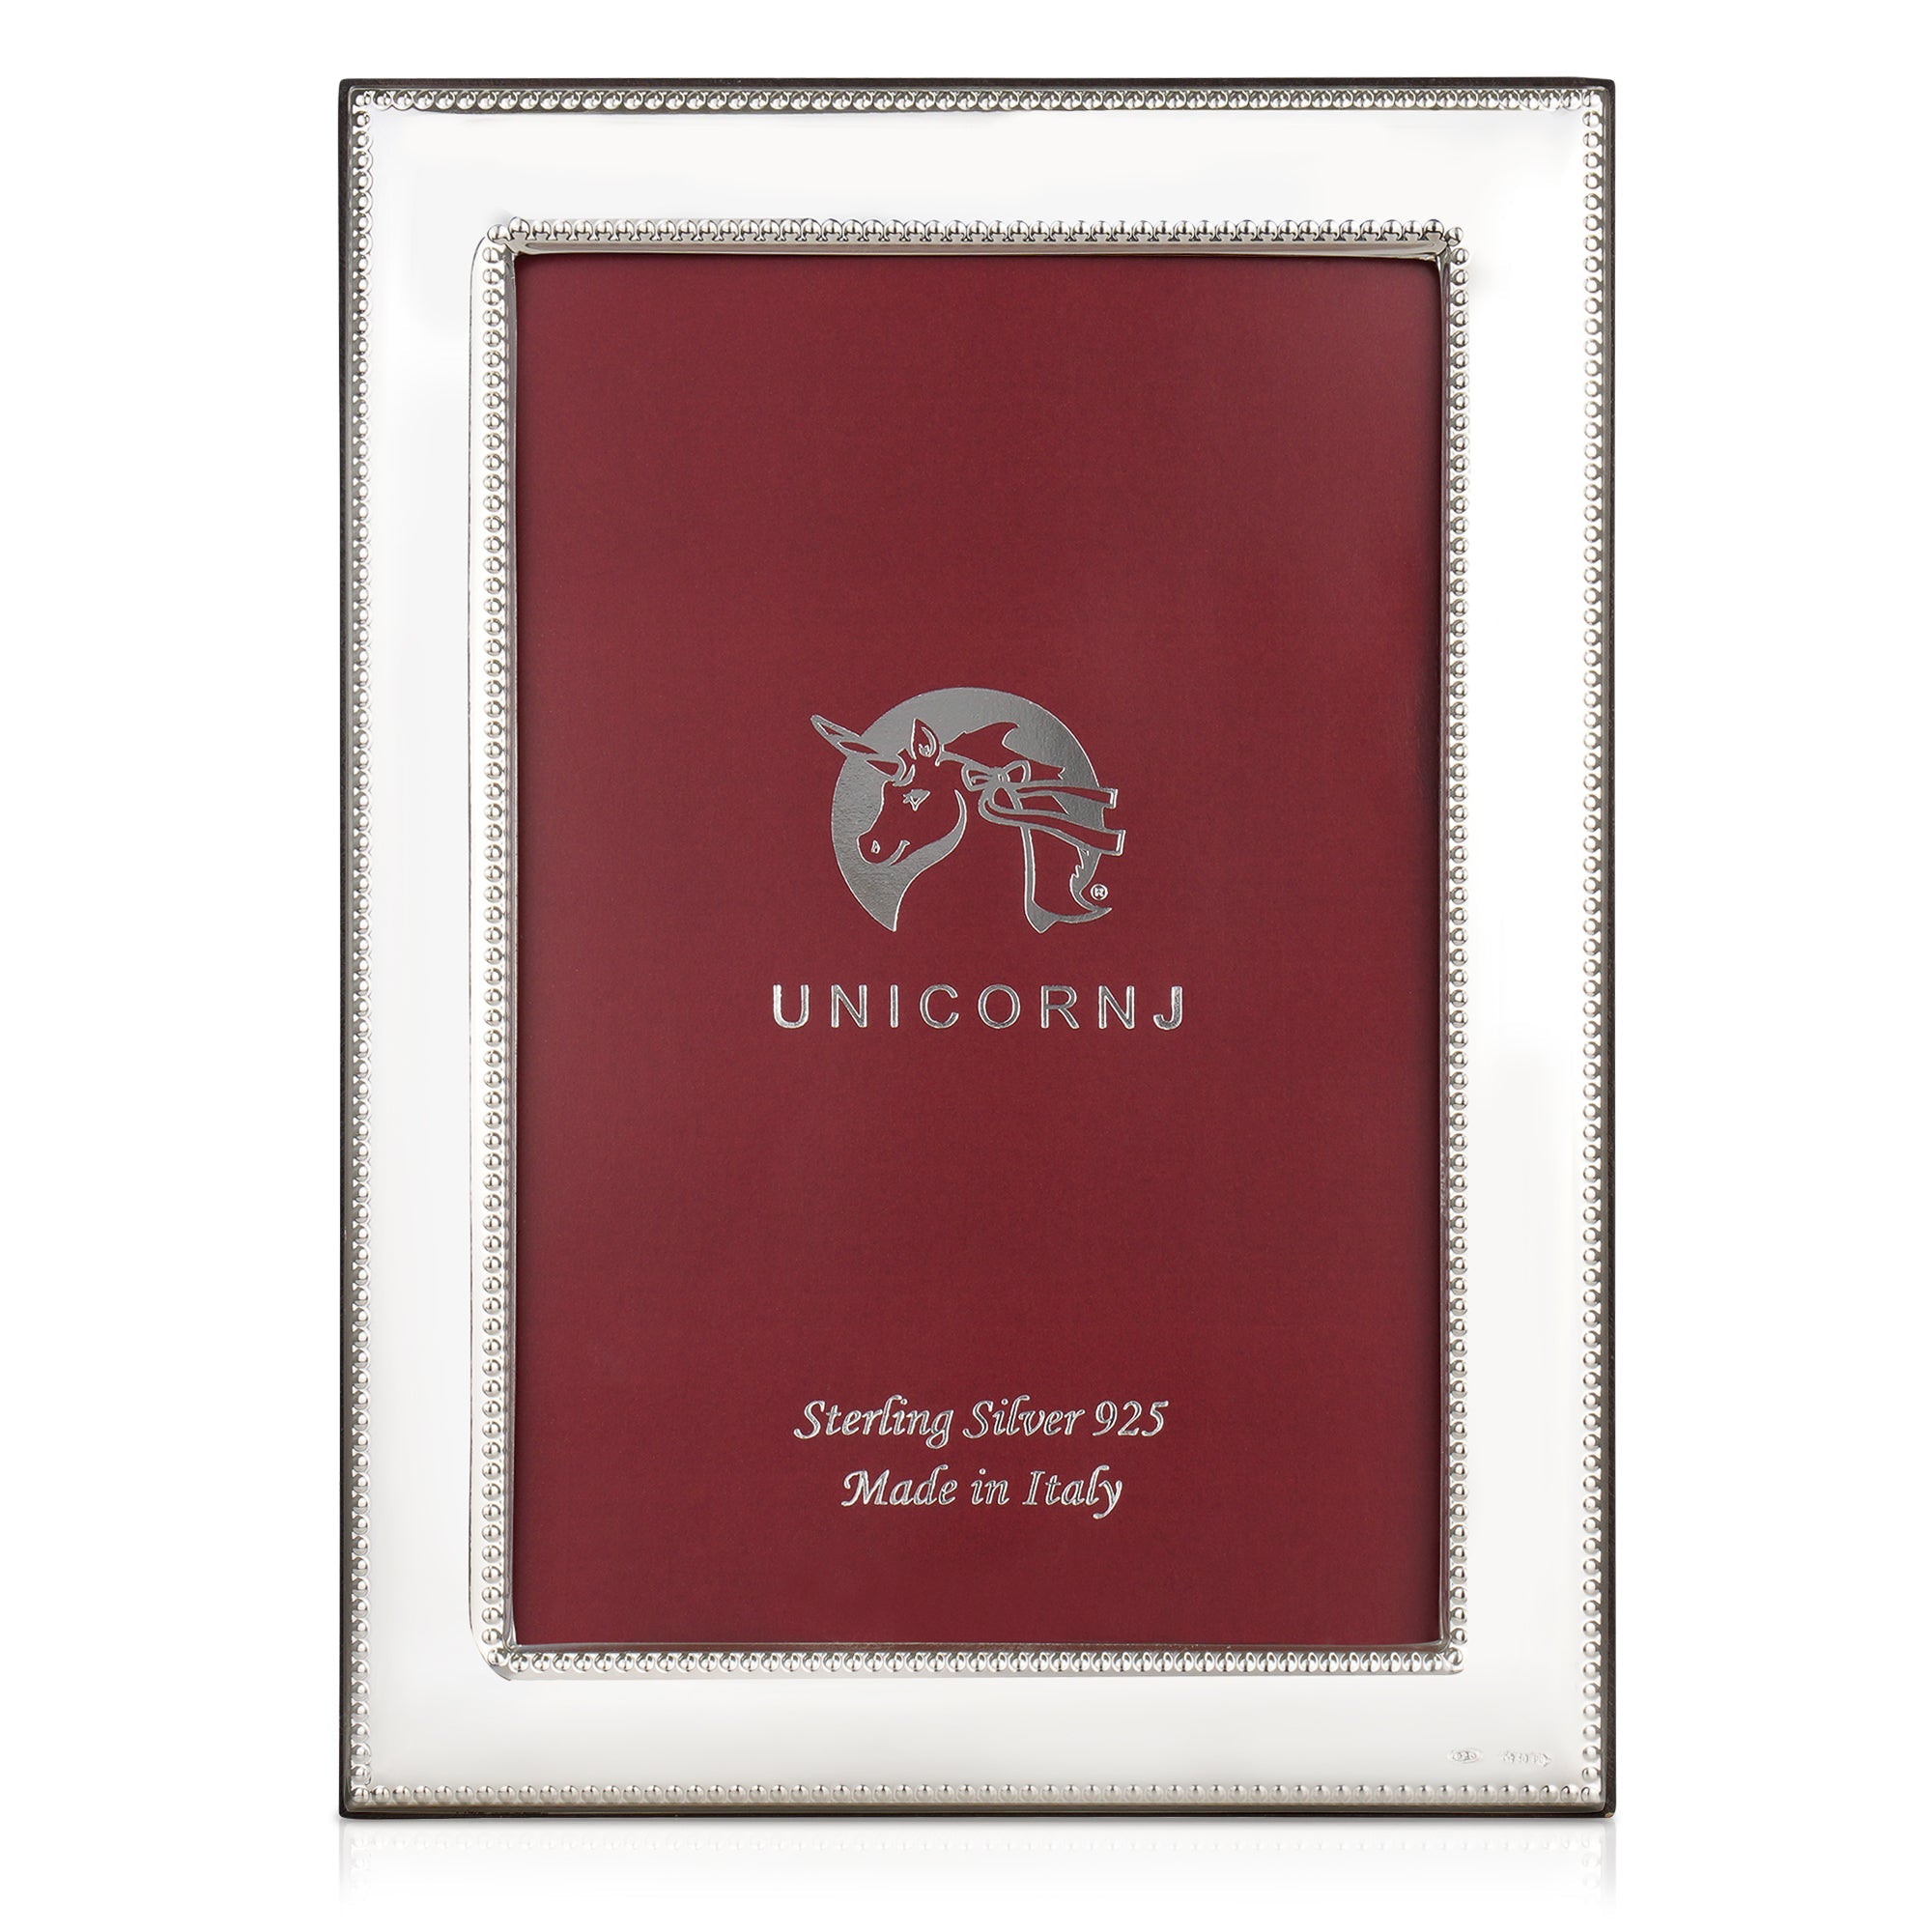 UNICORNJ Sterling Silver 4x6 Picture Frame Beaded Design 3/4" Inch Border Made In Italy